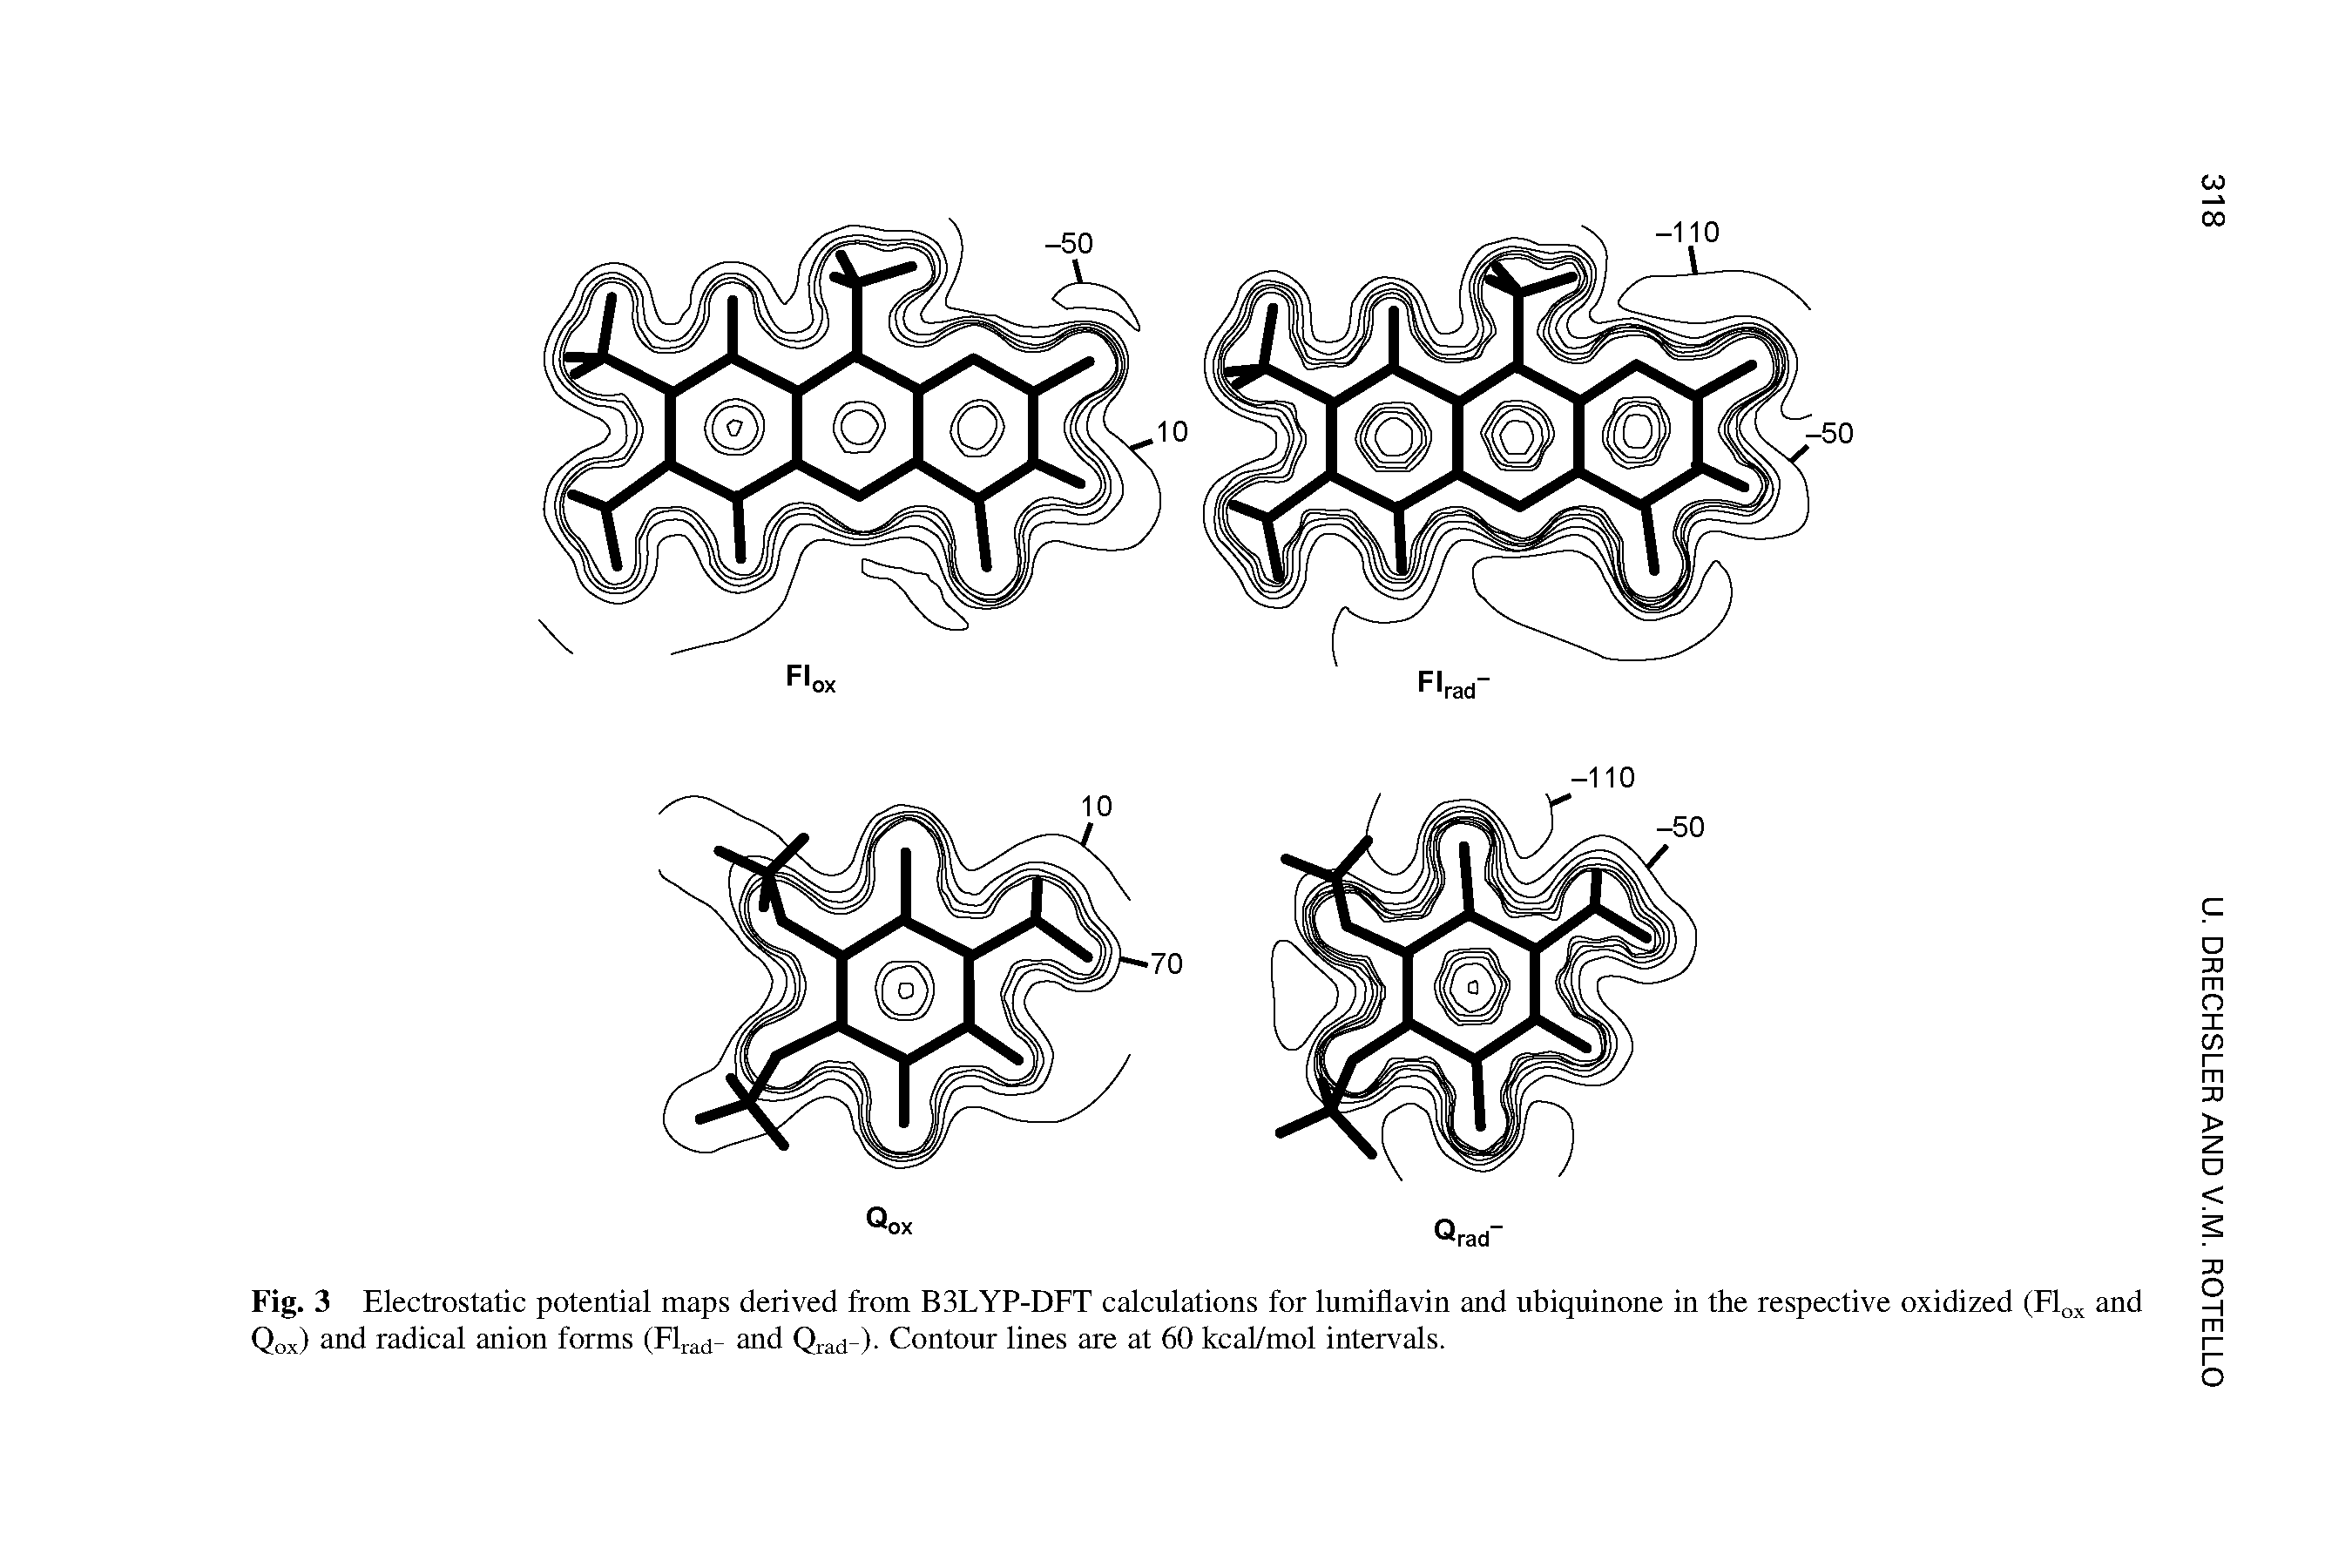 Fig. 3 Electrostatic potential maps derived from B3LYP-DFT calculations for lumiflavin and ubiquinone in the respective oxidized (Fly and Qox) and radical anion forms (Flj-ad- and Qrad-)- Contour lines are at 60 kcal/mol intervals.